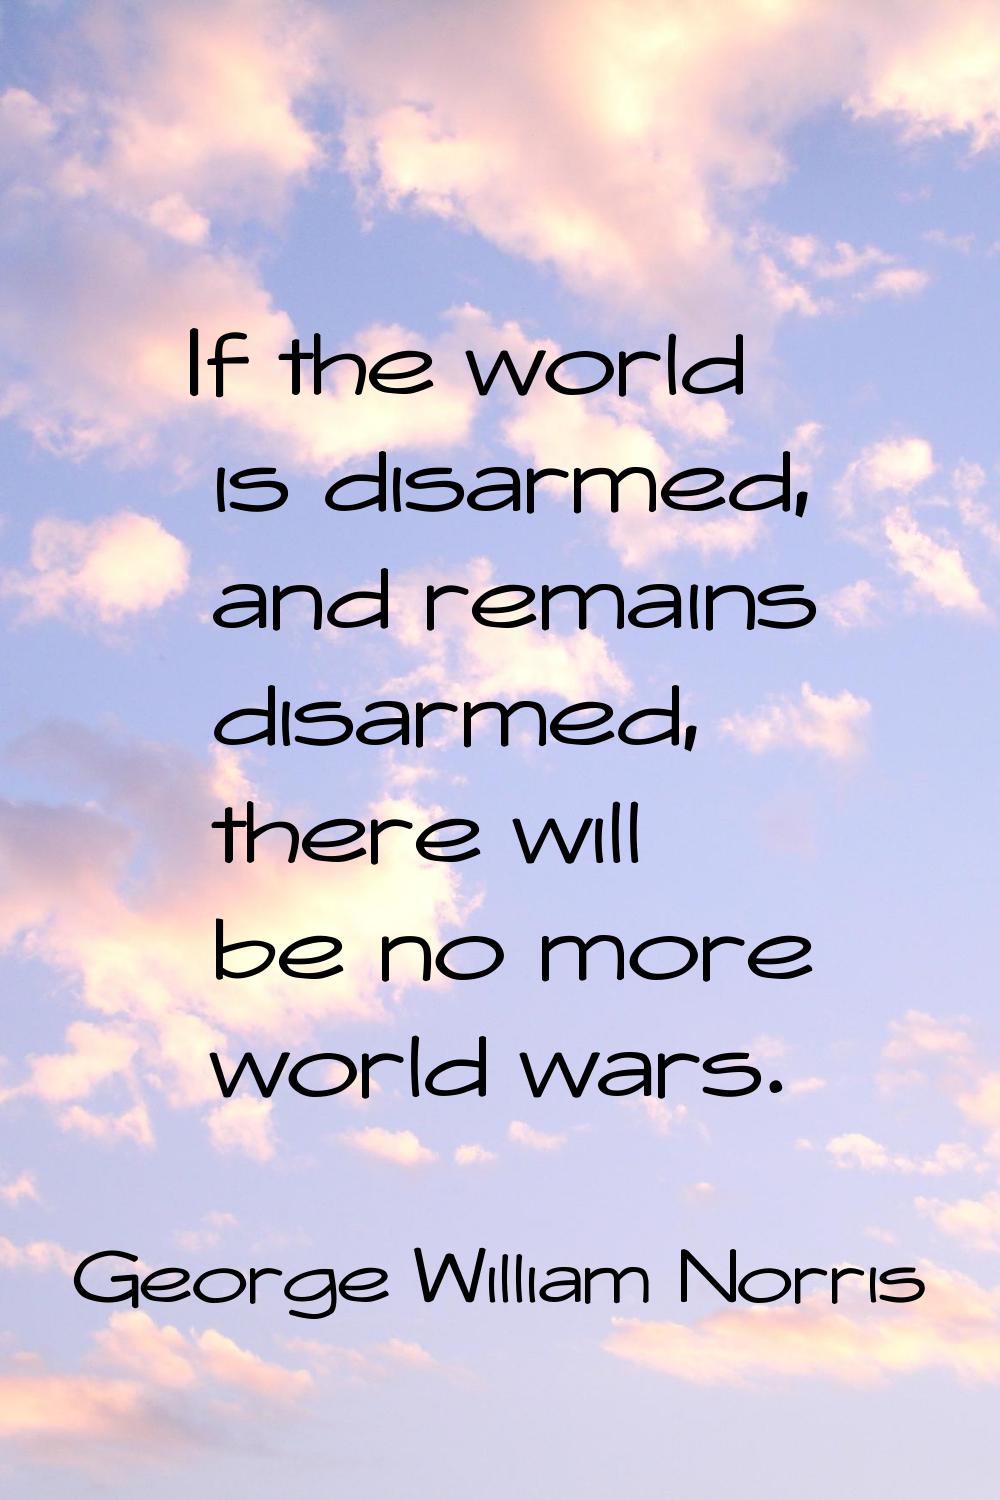 If the world is disarmed, and remains disarmed, there will be no more world wars.